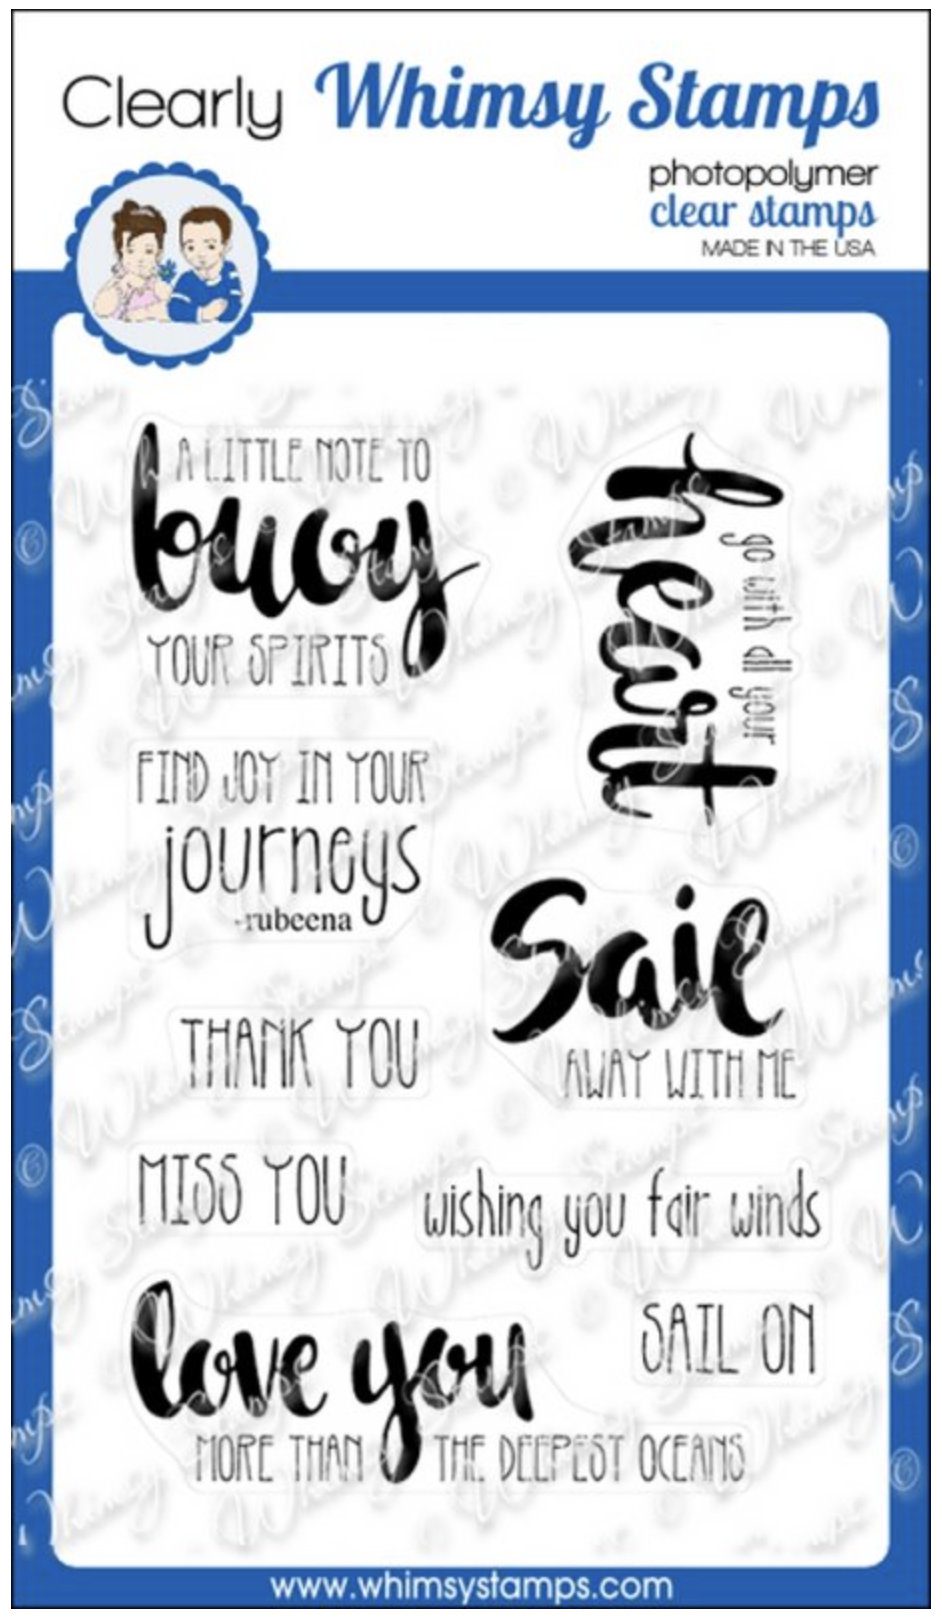 whimsystamps_3